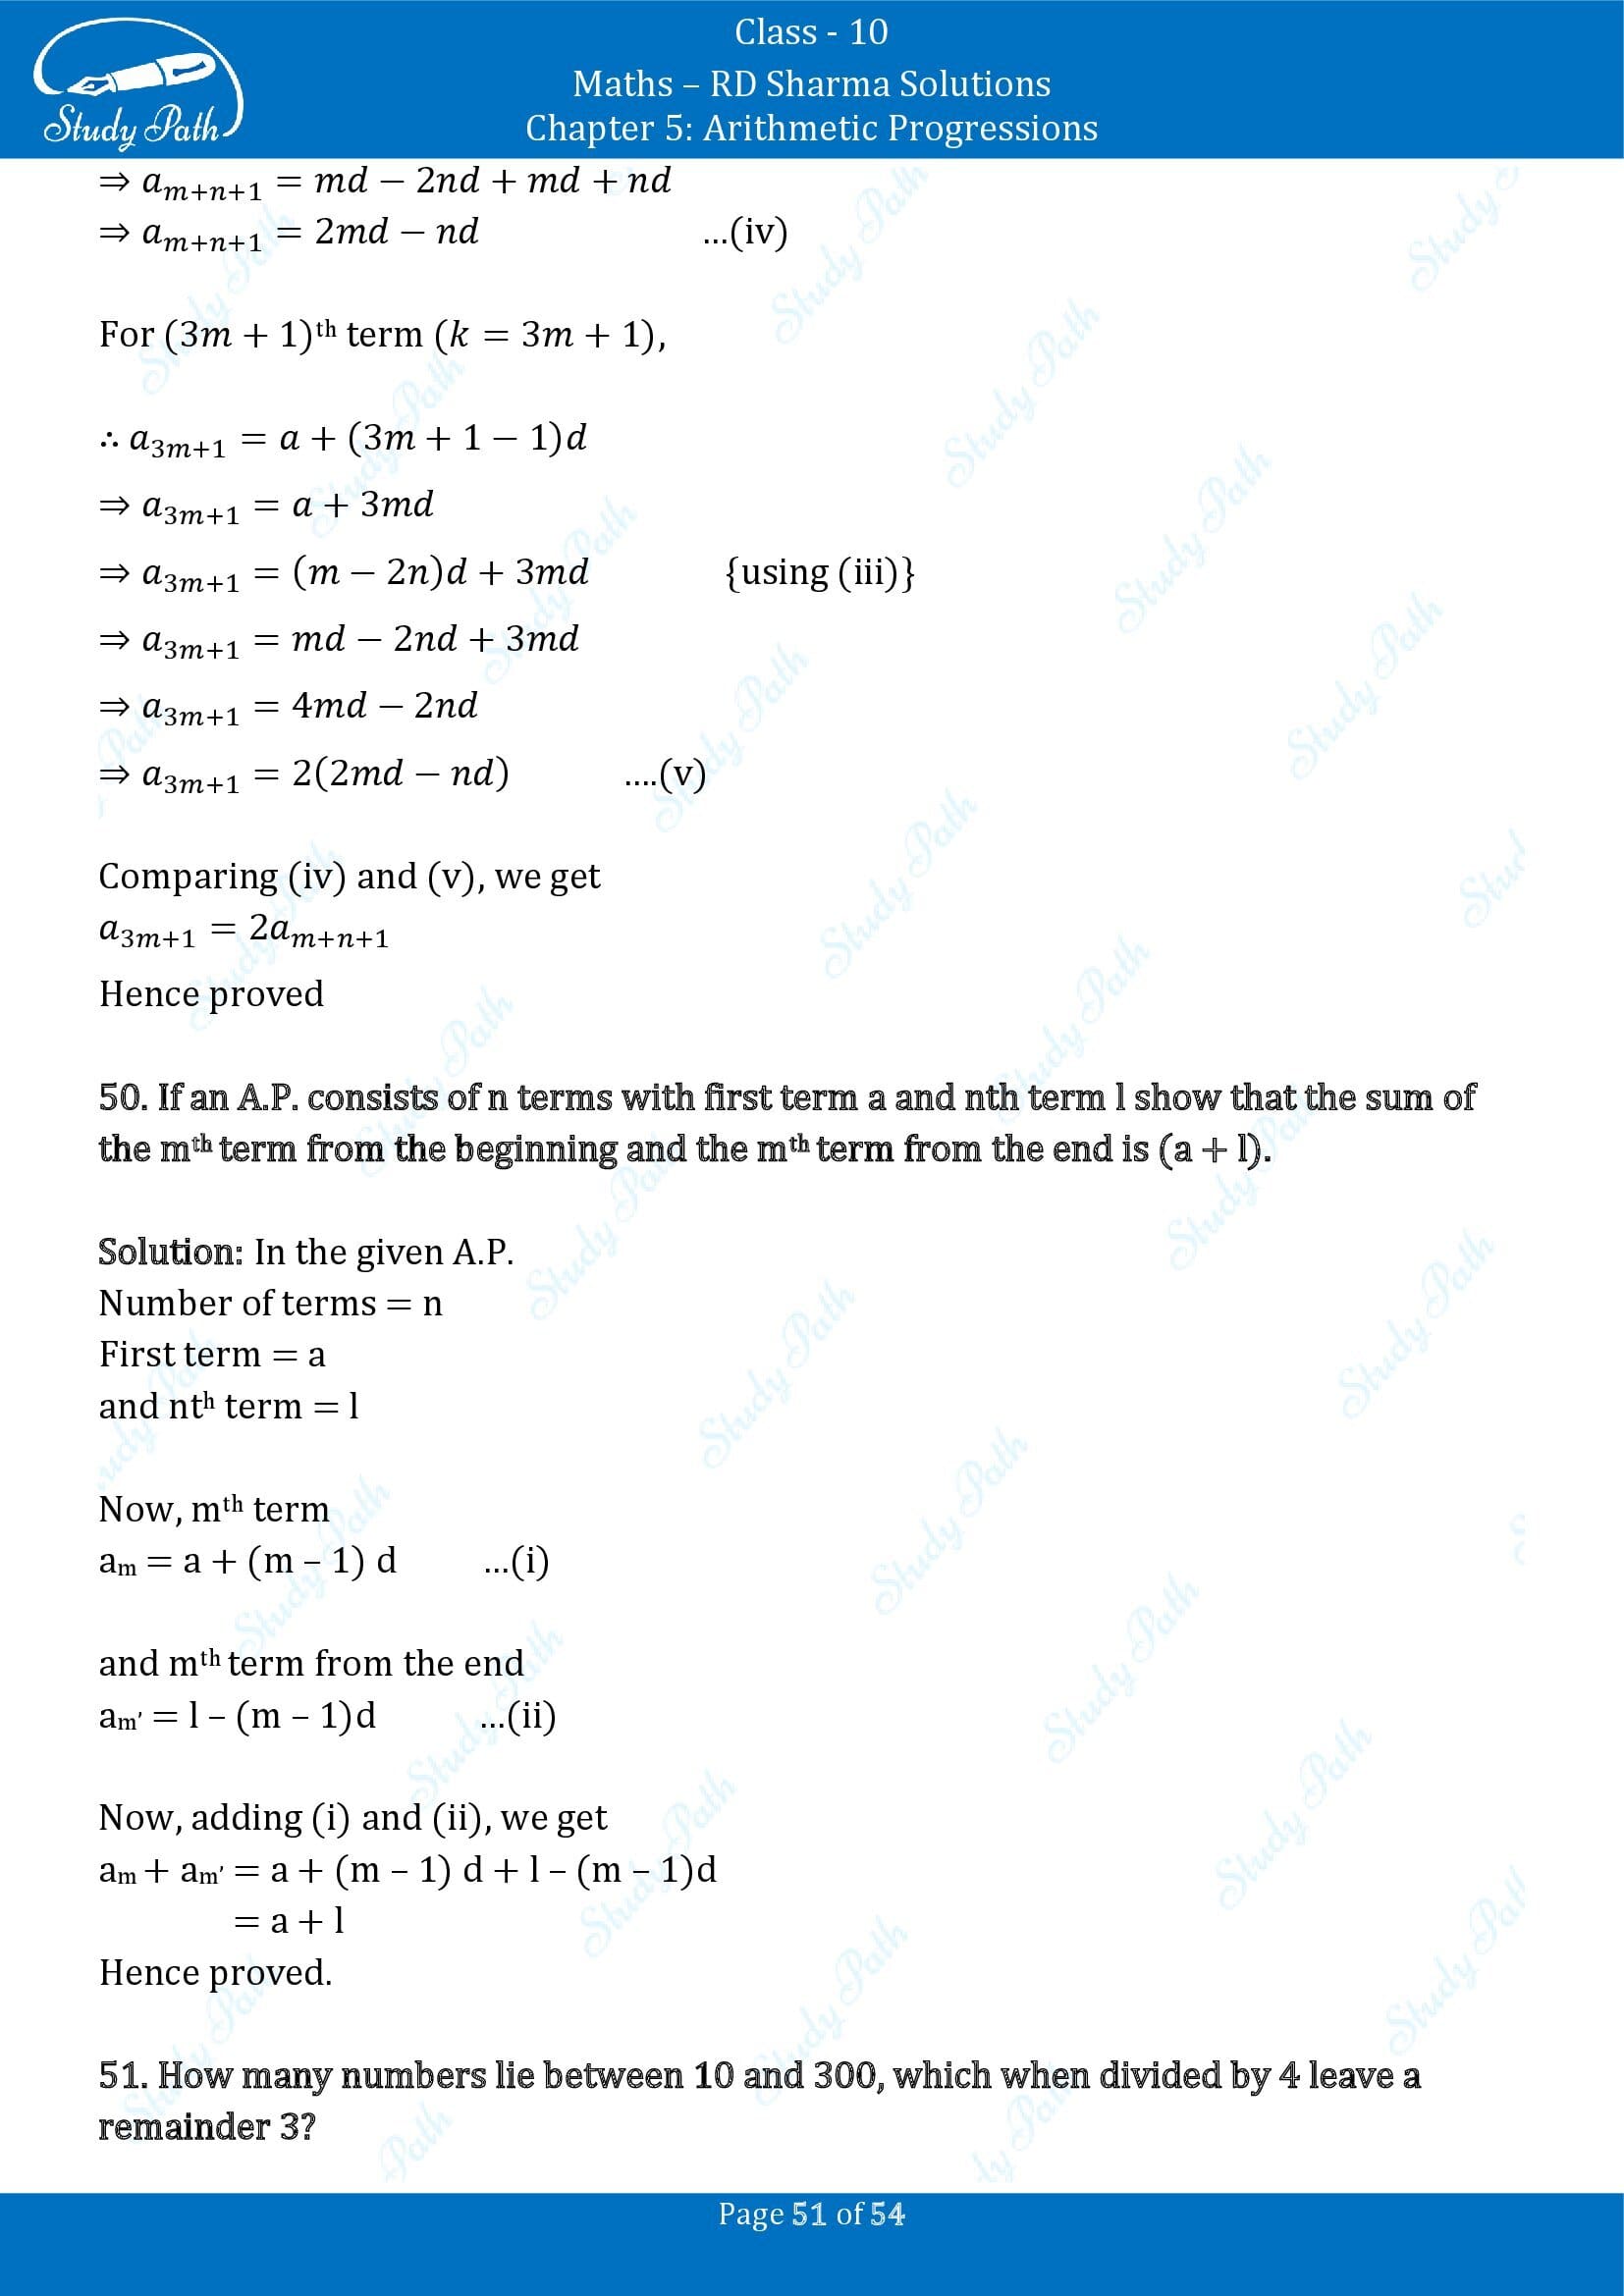 RD Sharma Solutions Class 10 Chapter 5 Arithmetic Progressions Exercise 5.4 00051